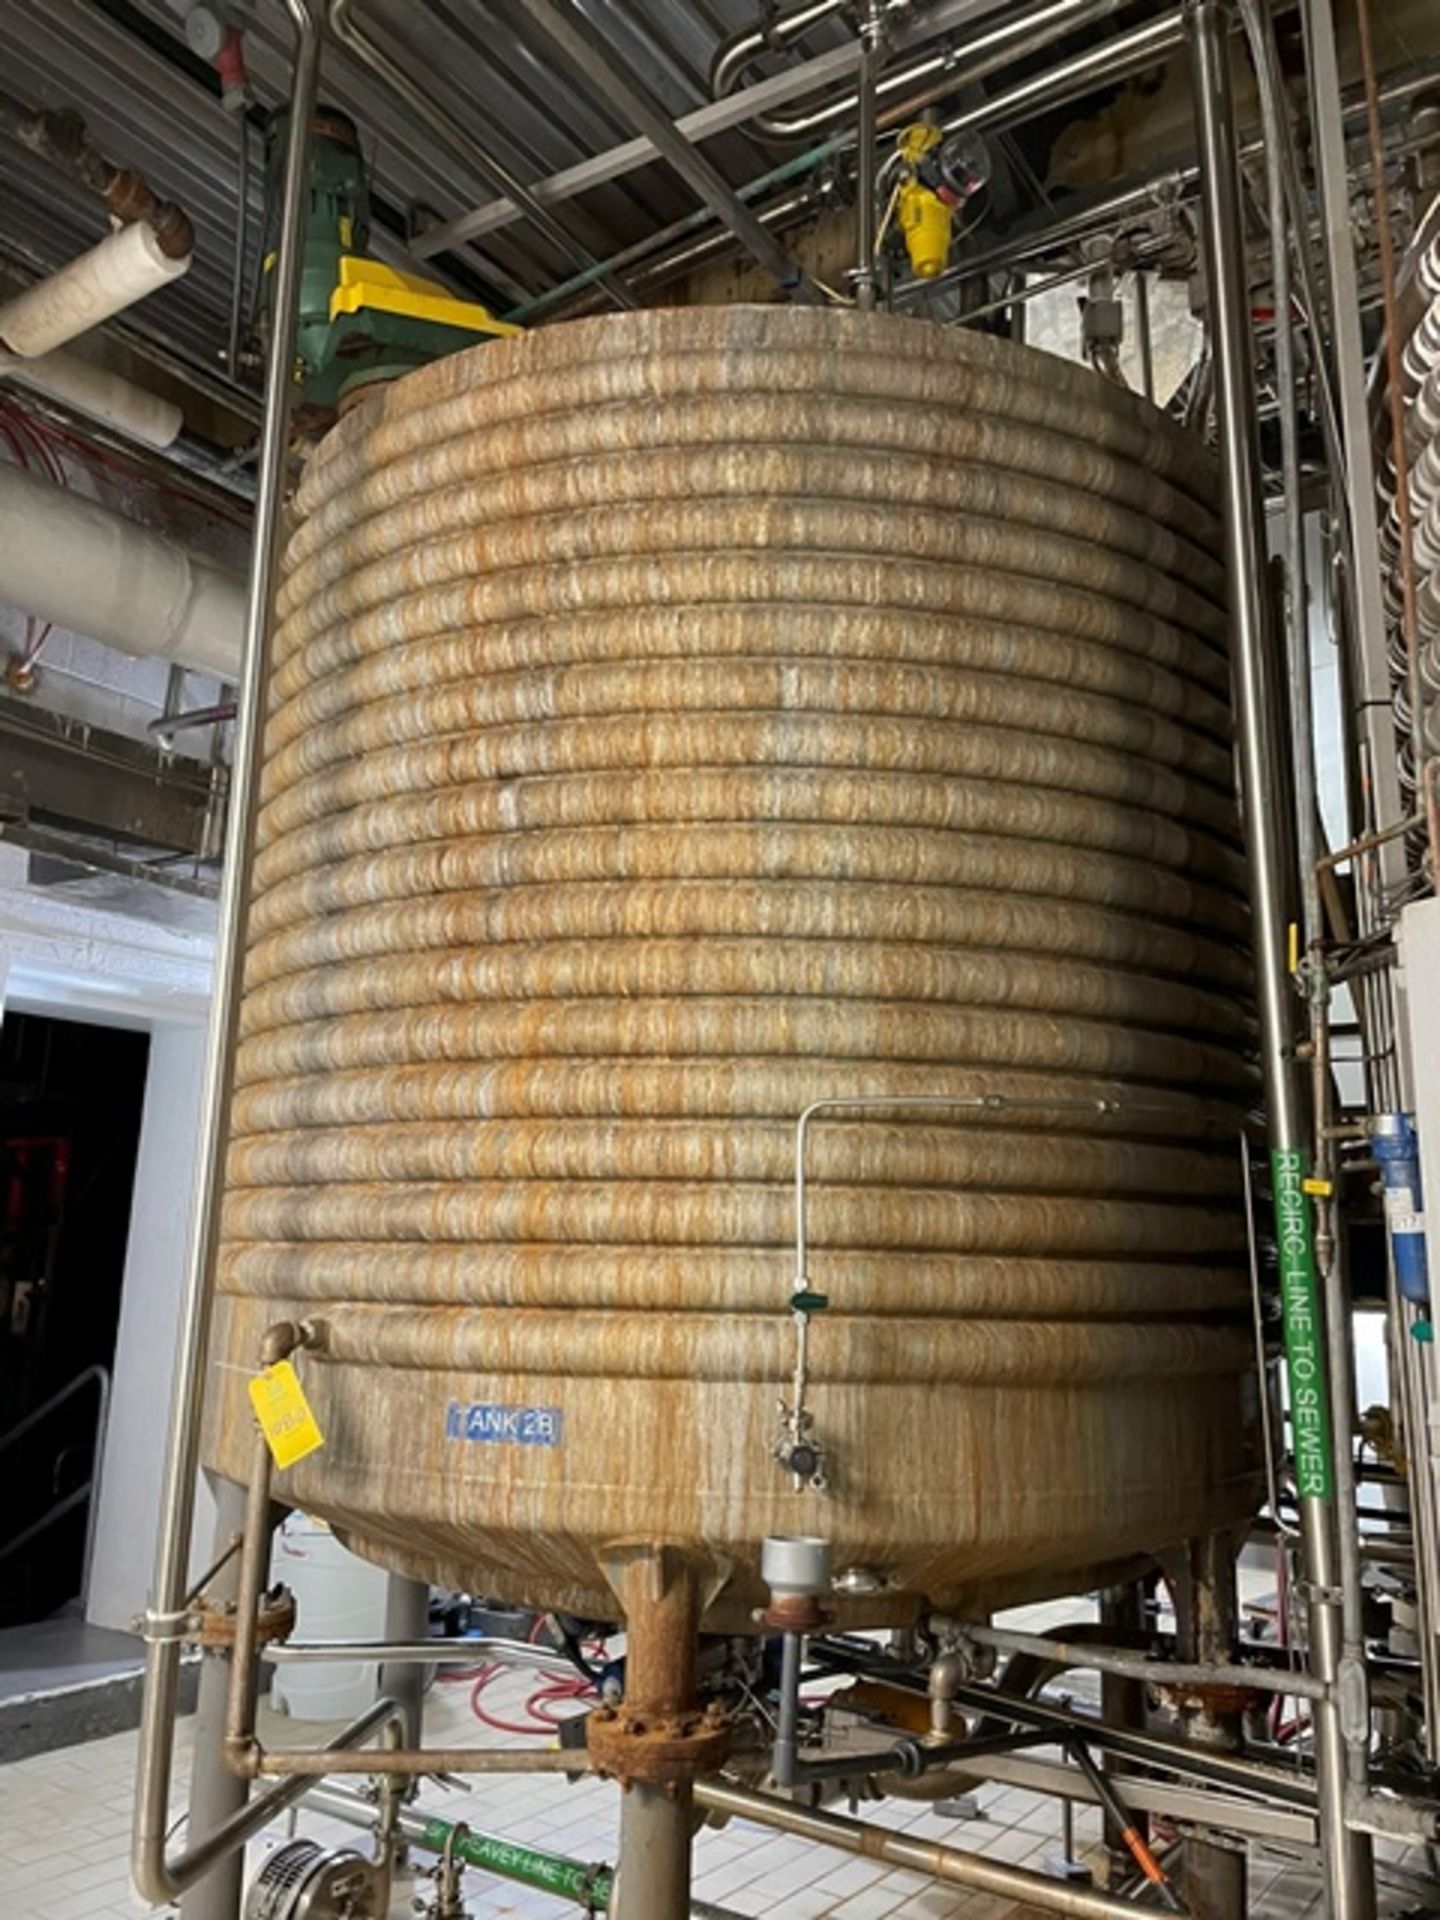 Tank - Stainless Steel Jacketed Tank, 8' Dia. X 9', Includes Lightnin Mixer